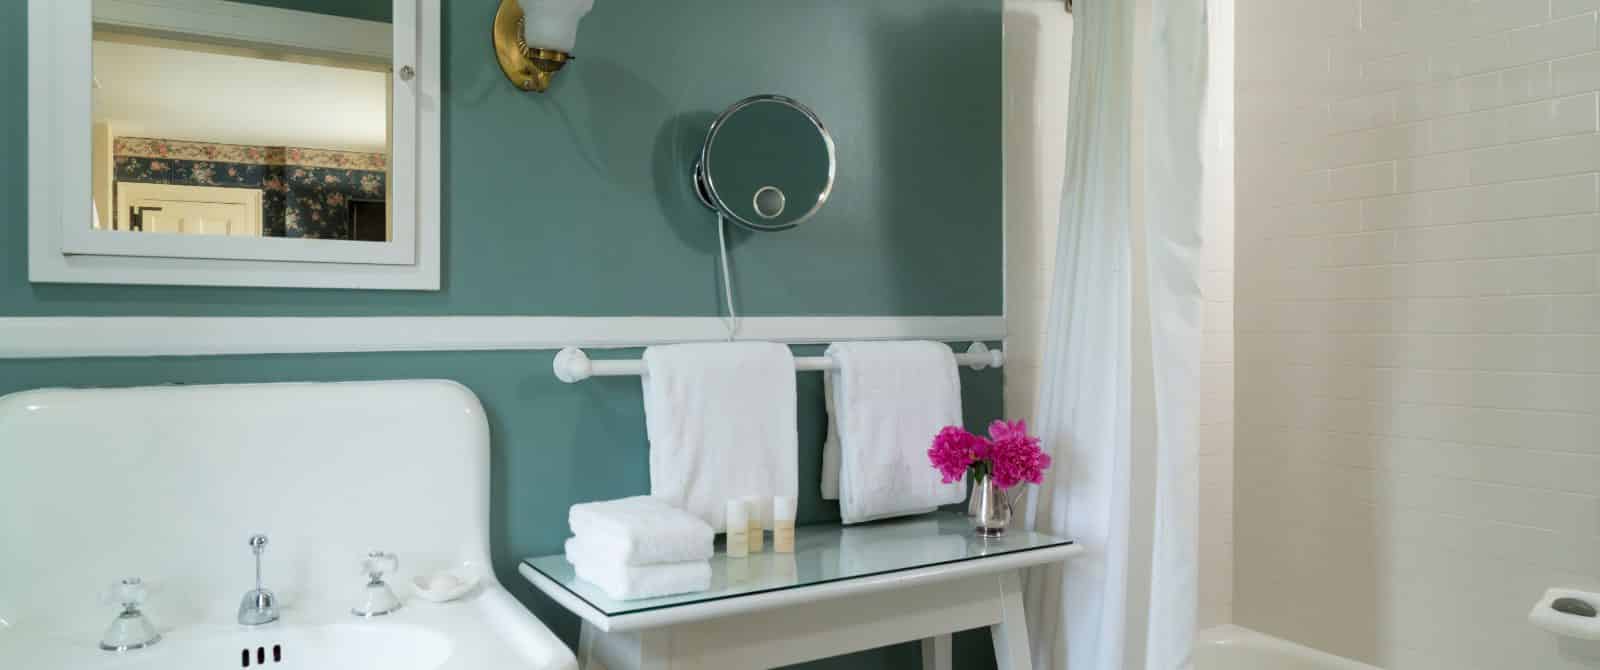 Bathroom with dark teal walls, white sink, white table, and white tub with shower